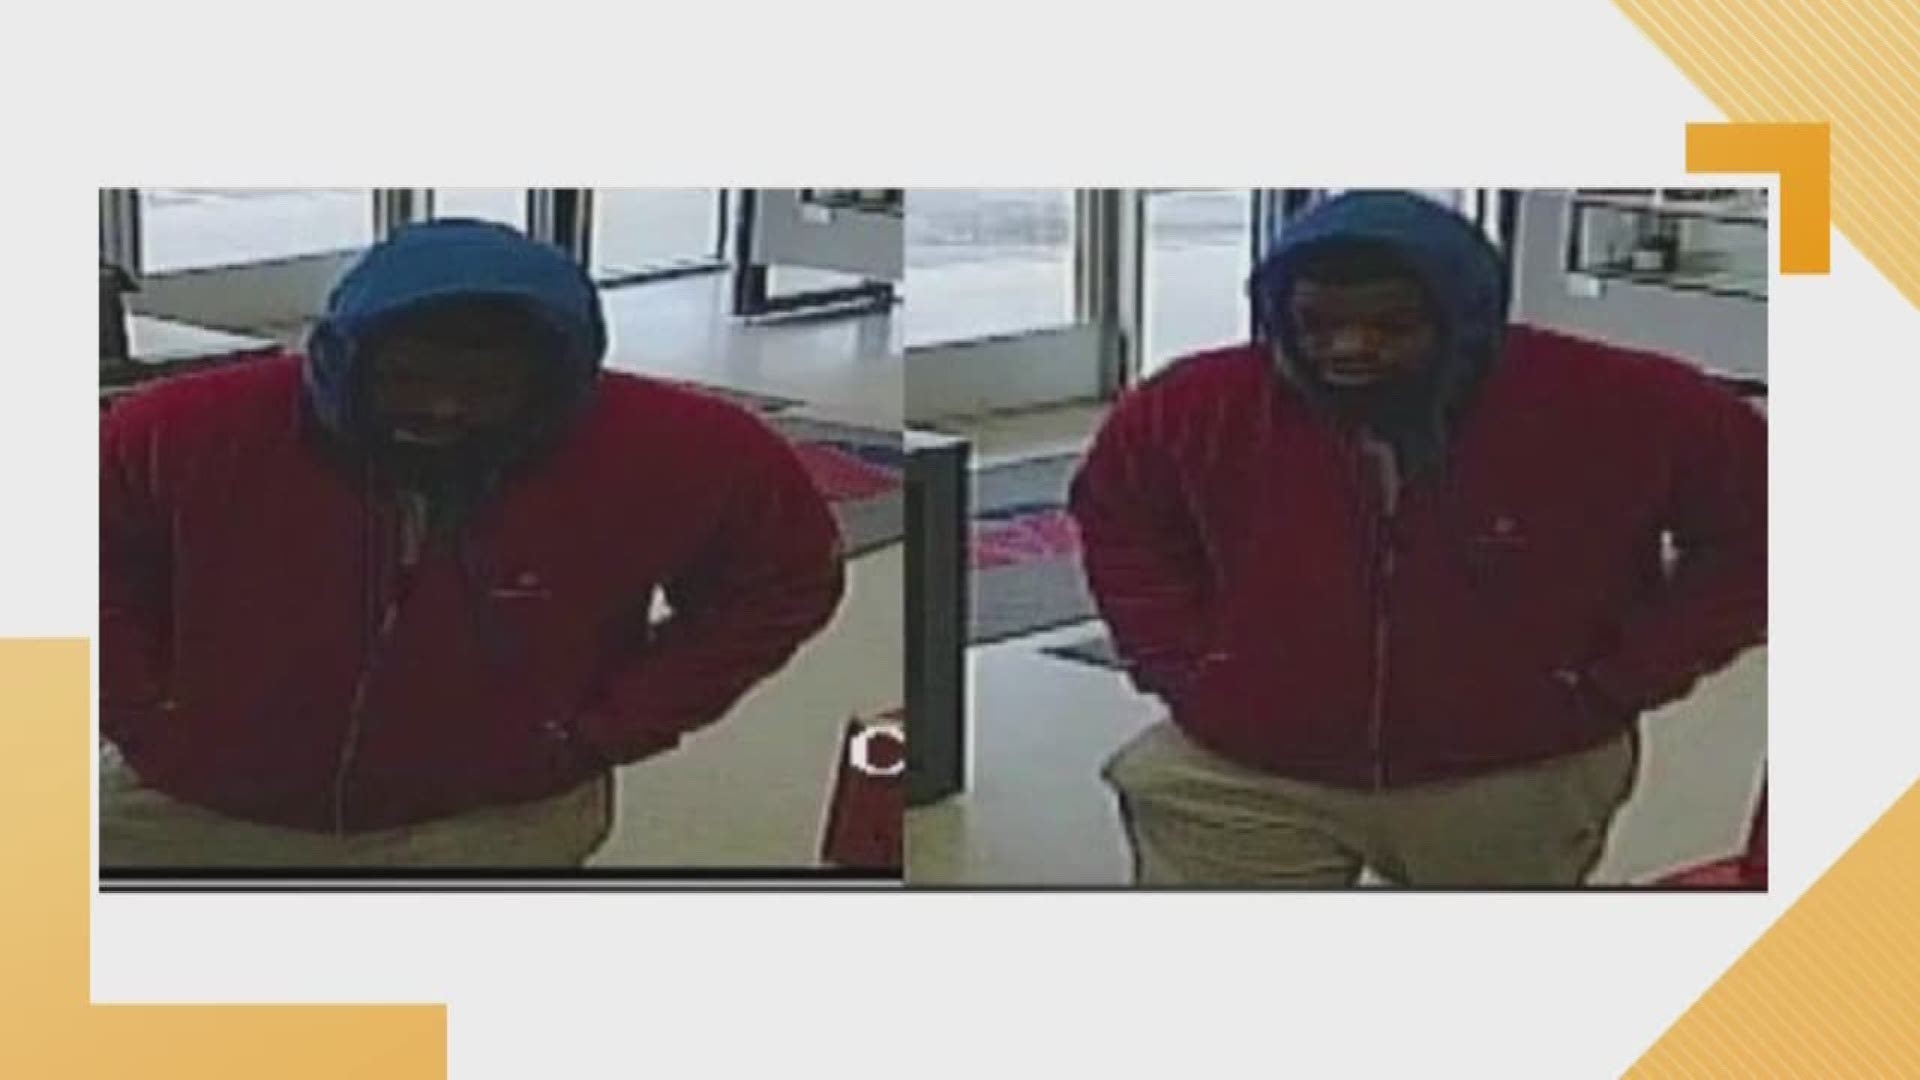 Hampton police are trying to find a person who robbed an ABC store.